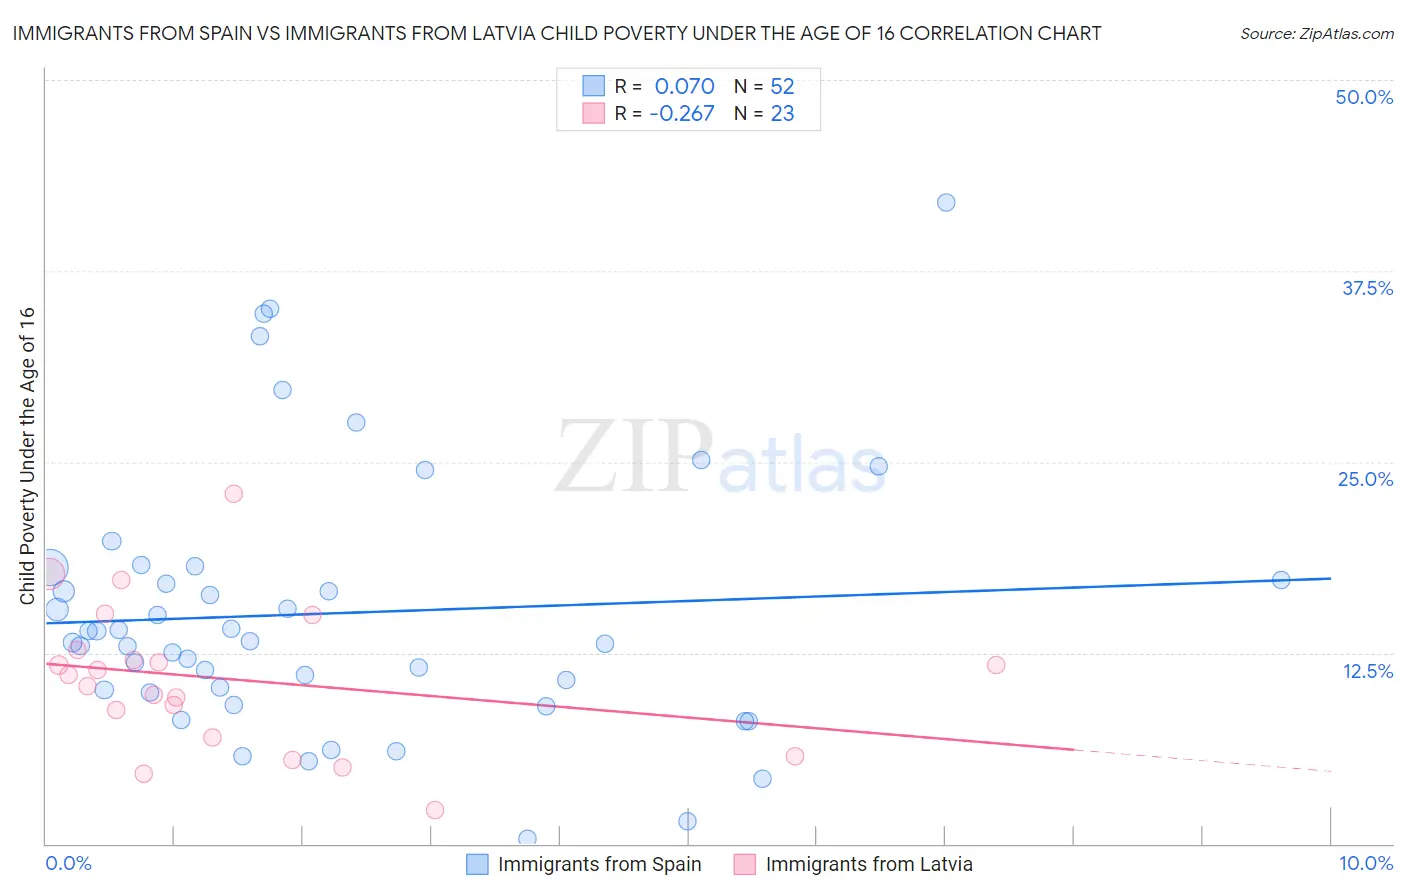 Immigrants from Spain vs Immigrants from Latvia Child Poverty Under the Age of 16